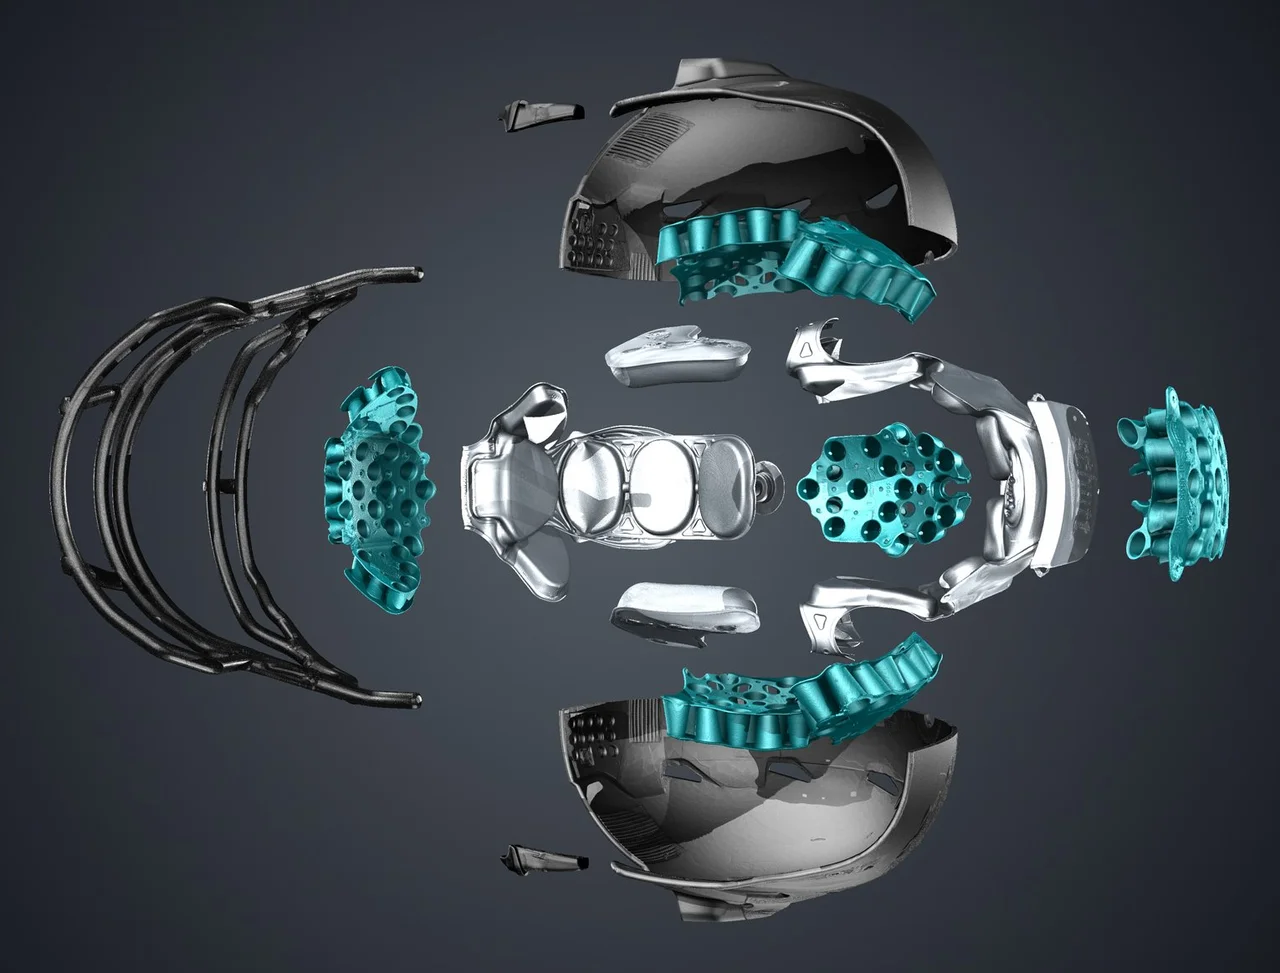 Exploded view of American football helmet components